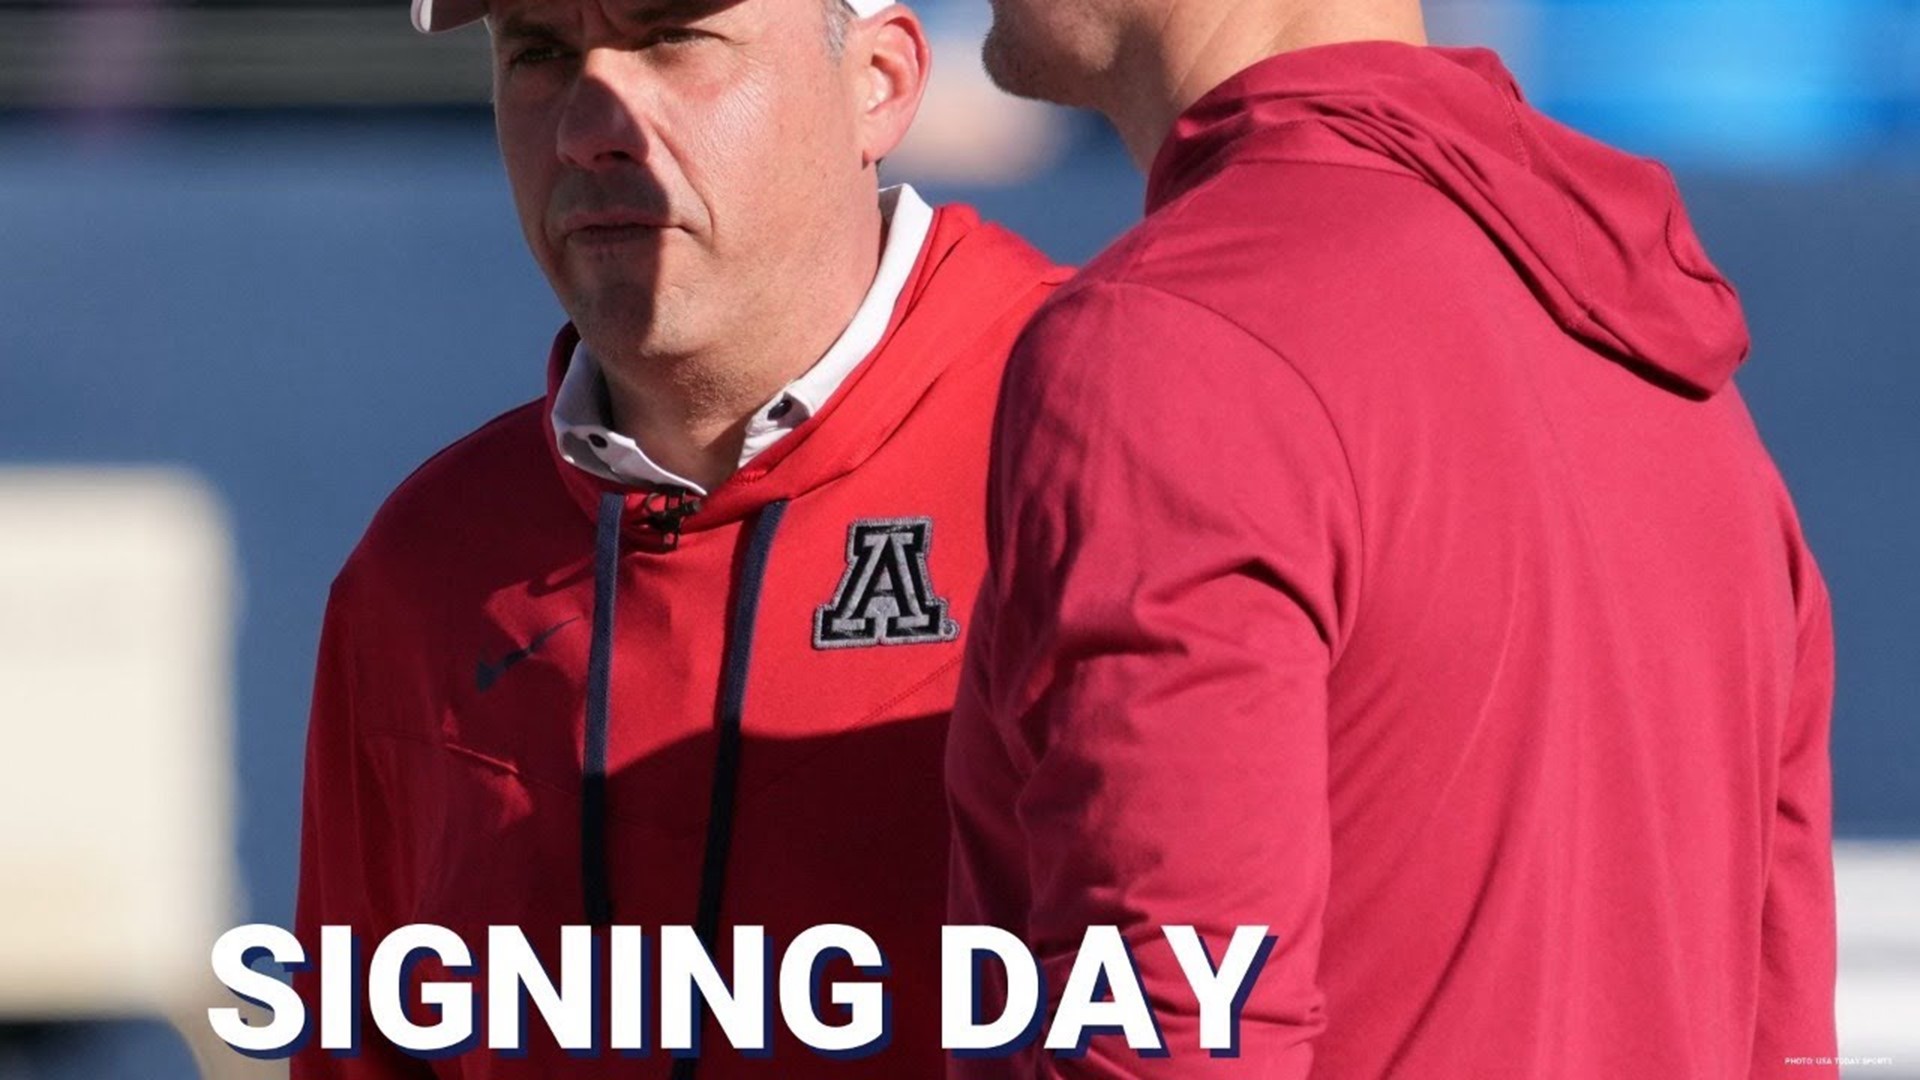 It was an uneventful day for Jedd Fisch and staff for signing day. But the Arizona Wildcats reeled in many of their top targets.